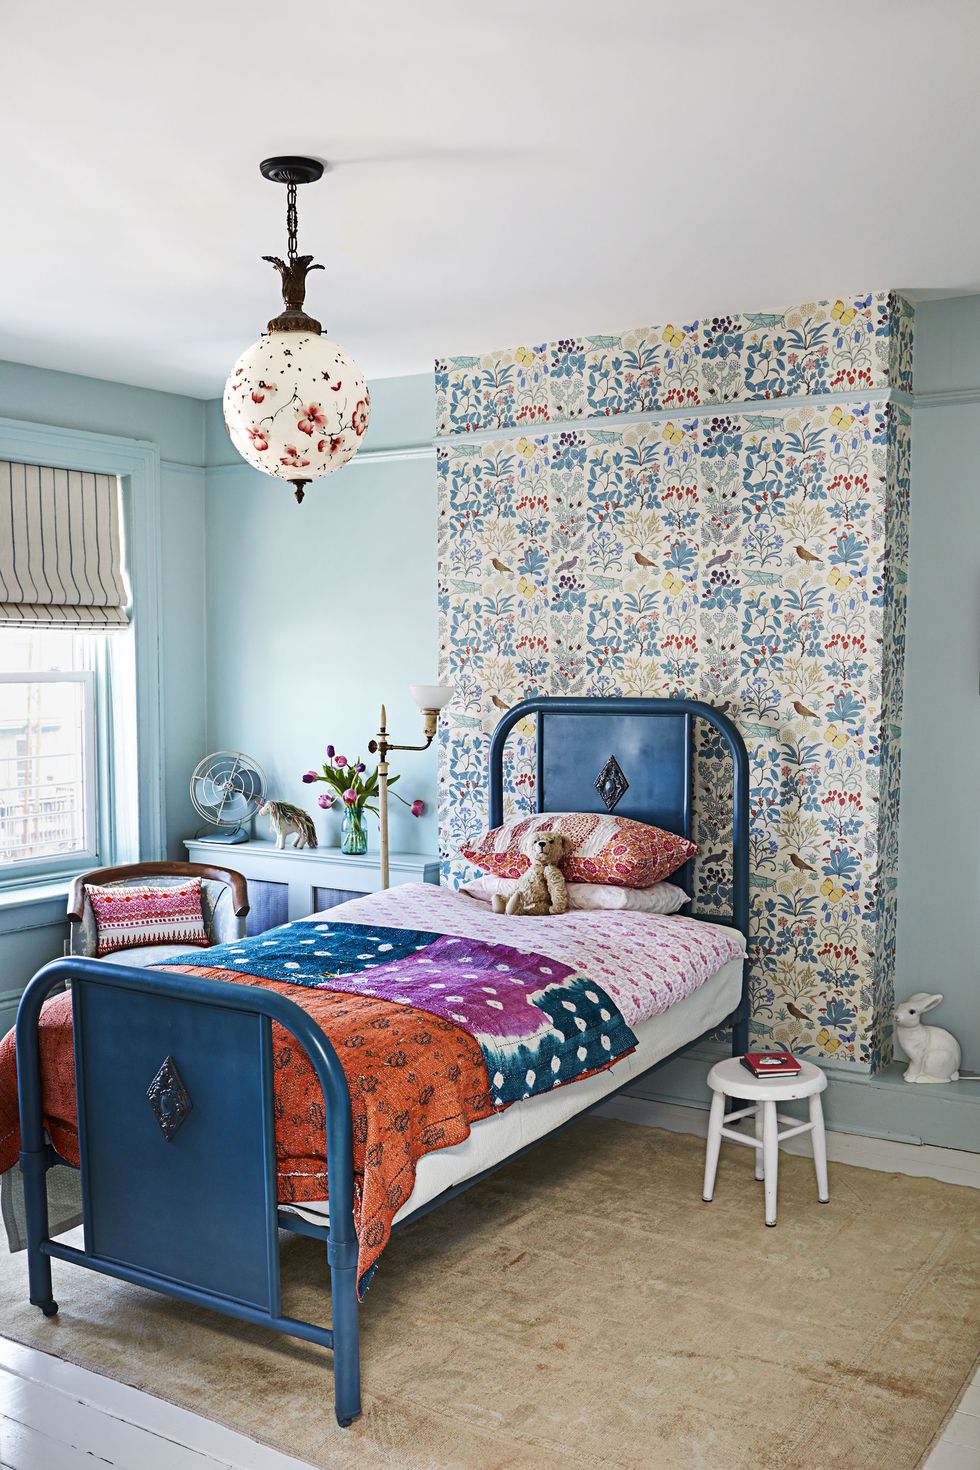 <p>There's plenty to love about vintage wallpaper — the whimsical designs, the one-of-a-kindness — except how stressed you'd be if it got stained and you couldn't patch it. Consequently, Albano opts for vintage reproductions (a great resource: <a href="http://www.designyourwall.com" target="_blank" data-tracking-id="recirc-text-link">designyourwall.com</a>). Bear in mind that you don't have to cover the whole room to get major impact. "Wallpaper can nicely de ne a space, like the framing e ect it creates around this bed," she says.</p>

<p><strong data-redactor-tag="strong" data-verified="redactor">RELATED: </strong><strong data-redactor-tag="strong" data-verified="redactor"><a href="http://www.redbookmag.com/home/g3869/housewarming-gifts-under-20/" target="_blank" data-tracking-id="recirc-text-link">22 Practical Housewarming Gifts Under $20</a></strong></p>